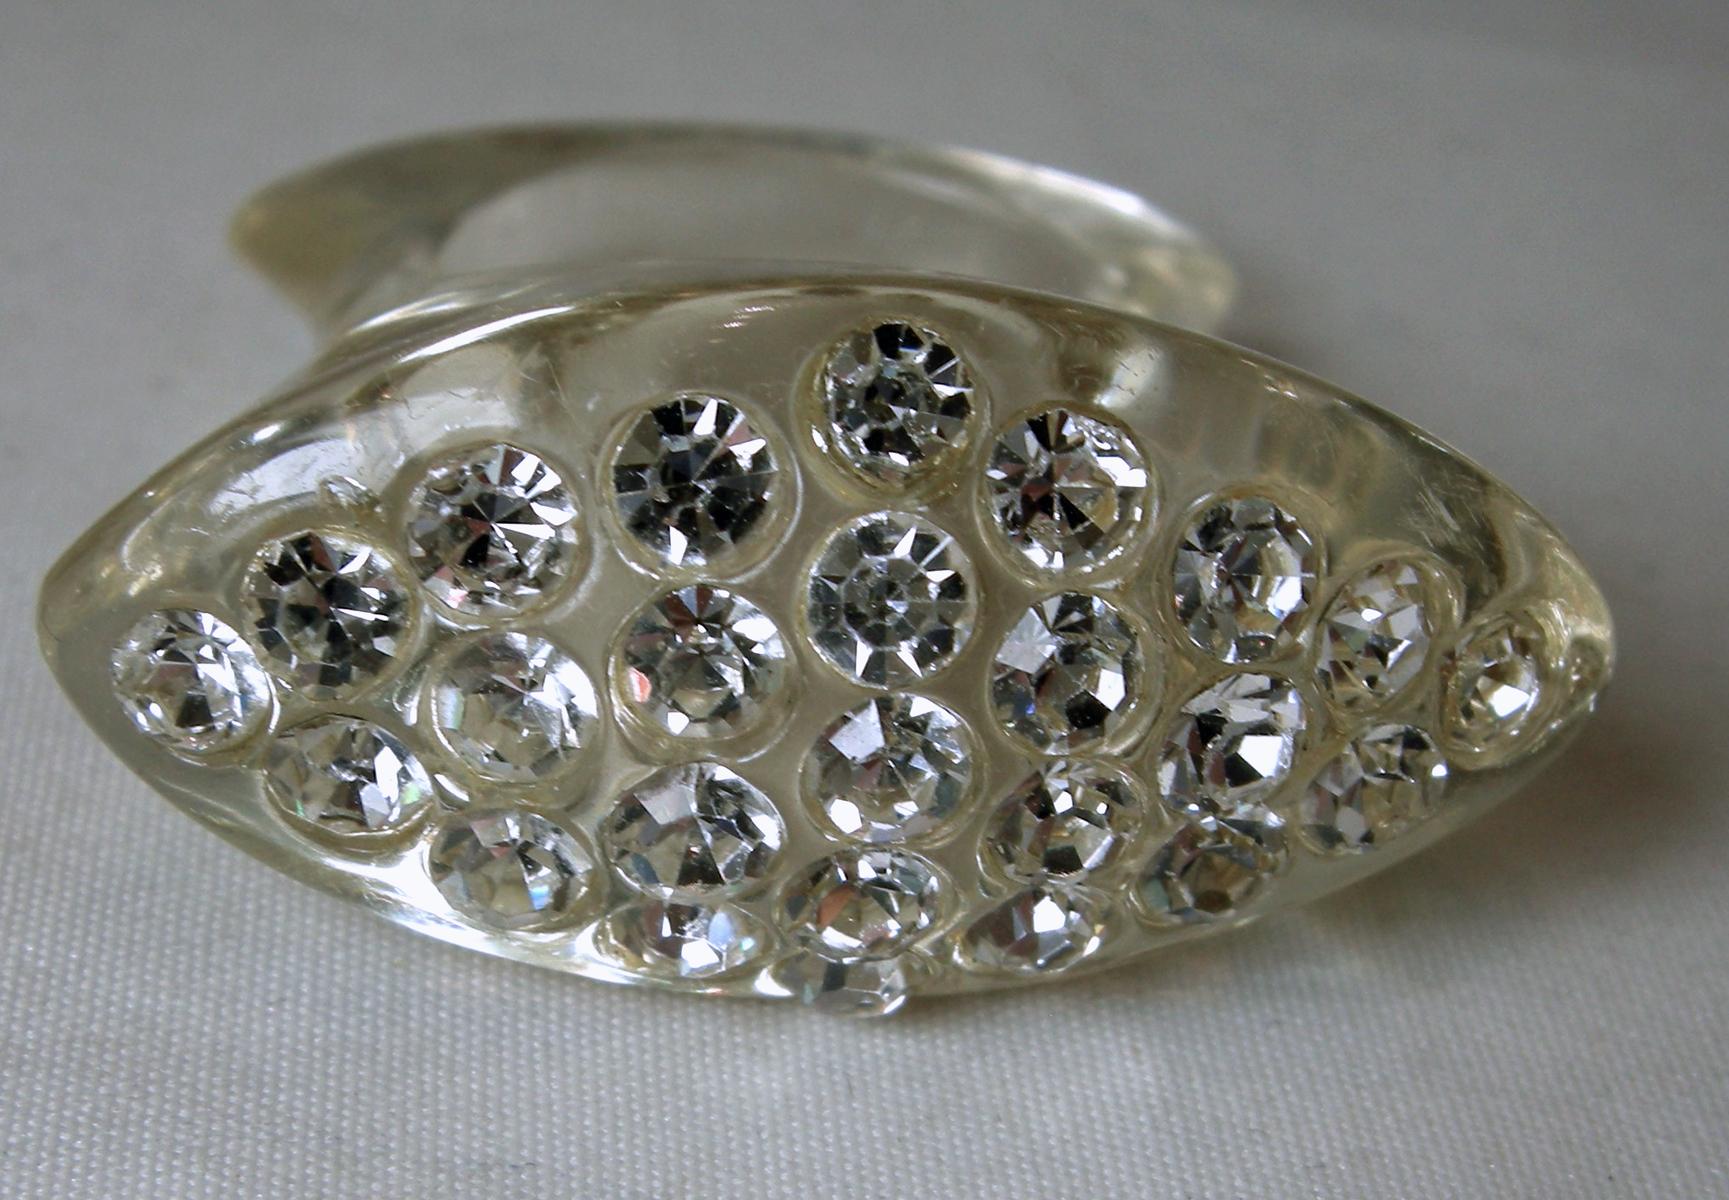 This vintage 1960s ring has beautiful clear crystals in a wide Lucite setting.  The ring is a size 8 and measures 1-1/4” x 5/8”.  It is in excellent condition.